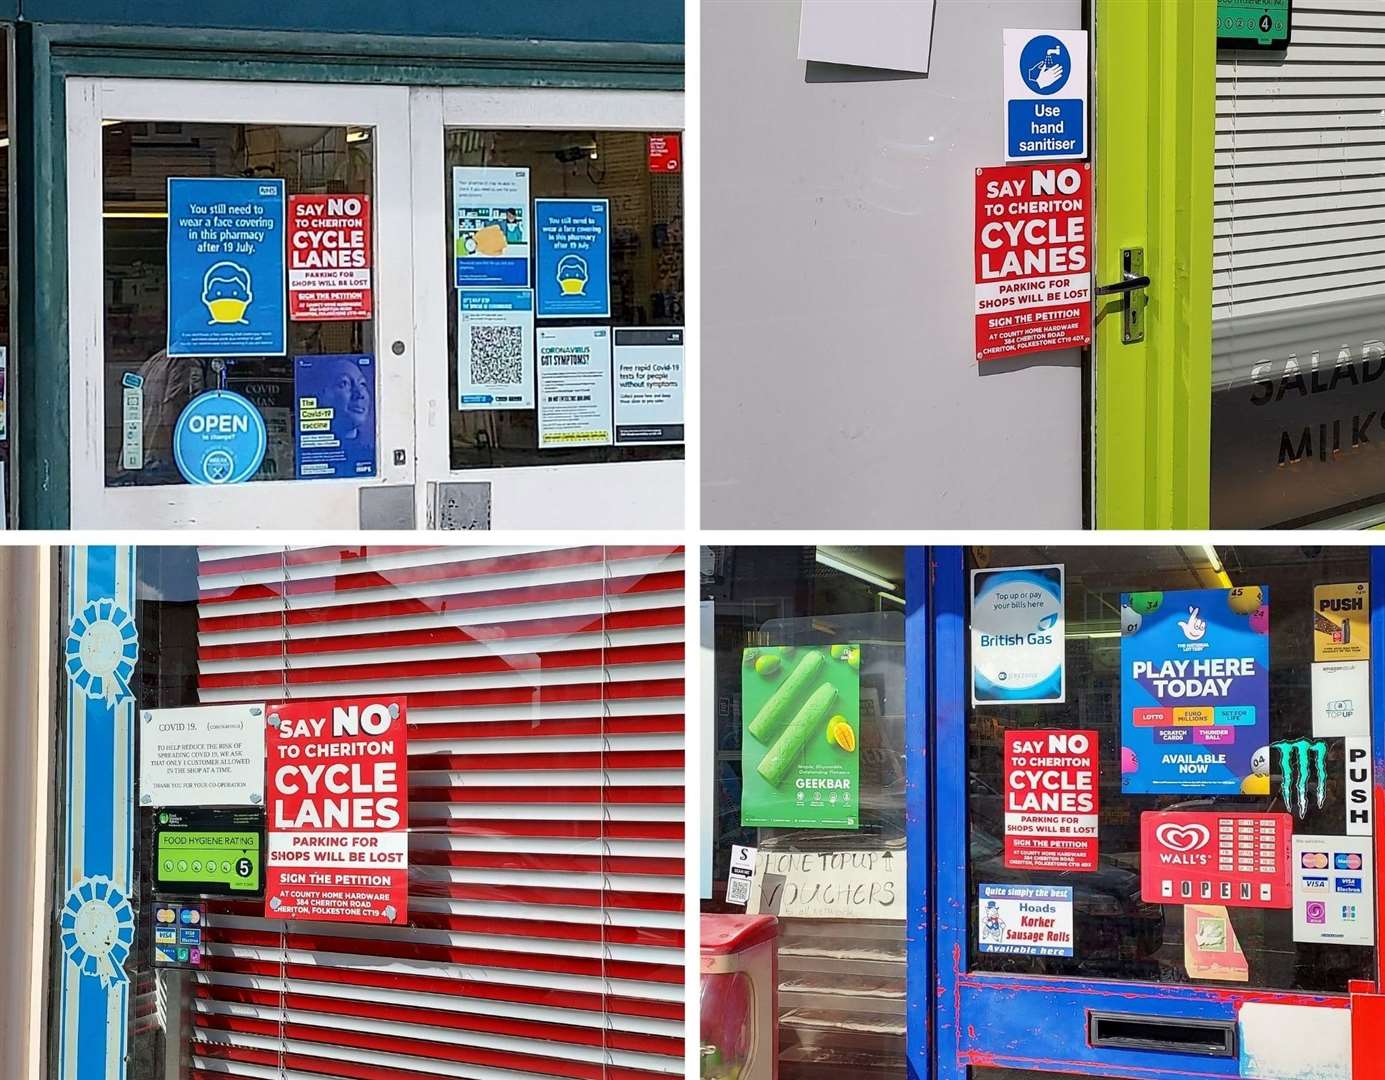 Posters opposing cycle lanes in Cheriton appeared in shop windows last year